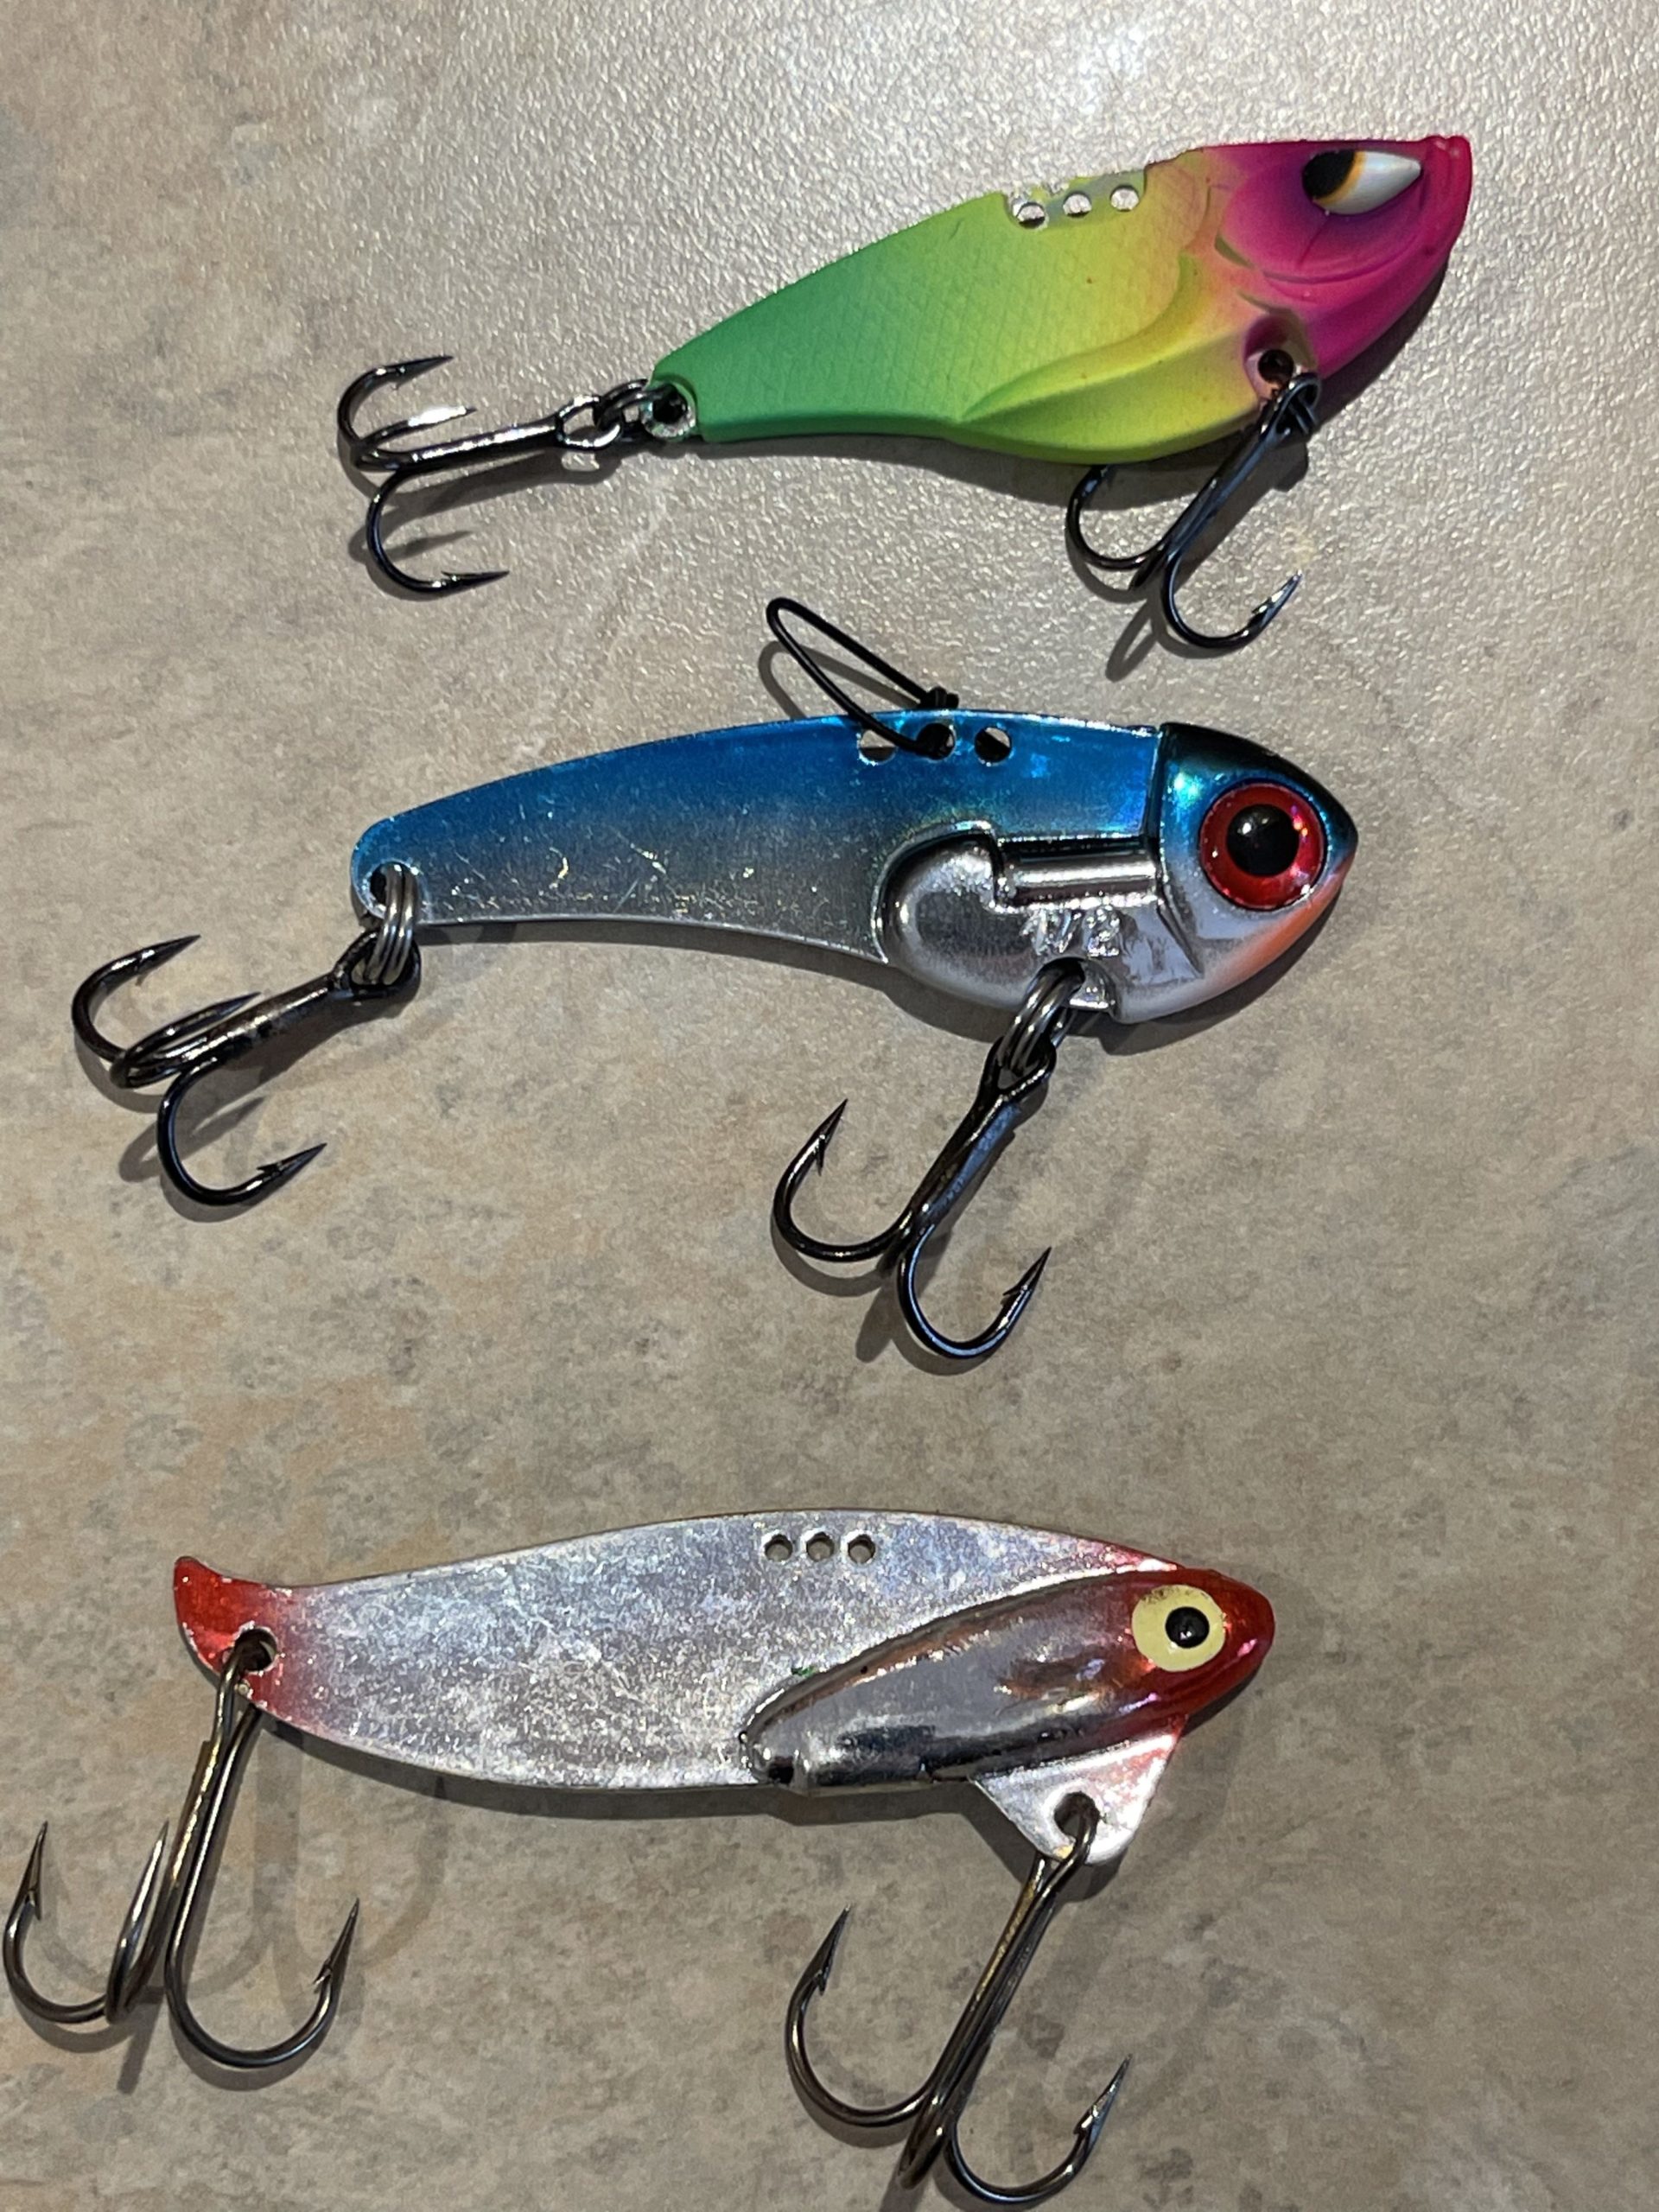 How to Make Fishing Lures  Make Your Own Fishing Lure - Valley